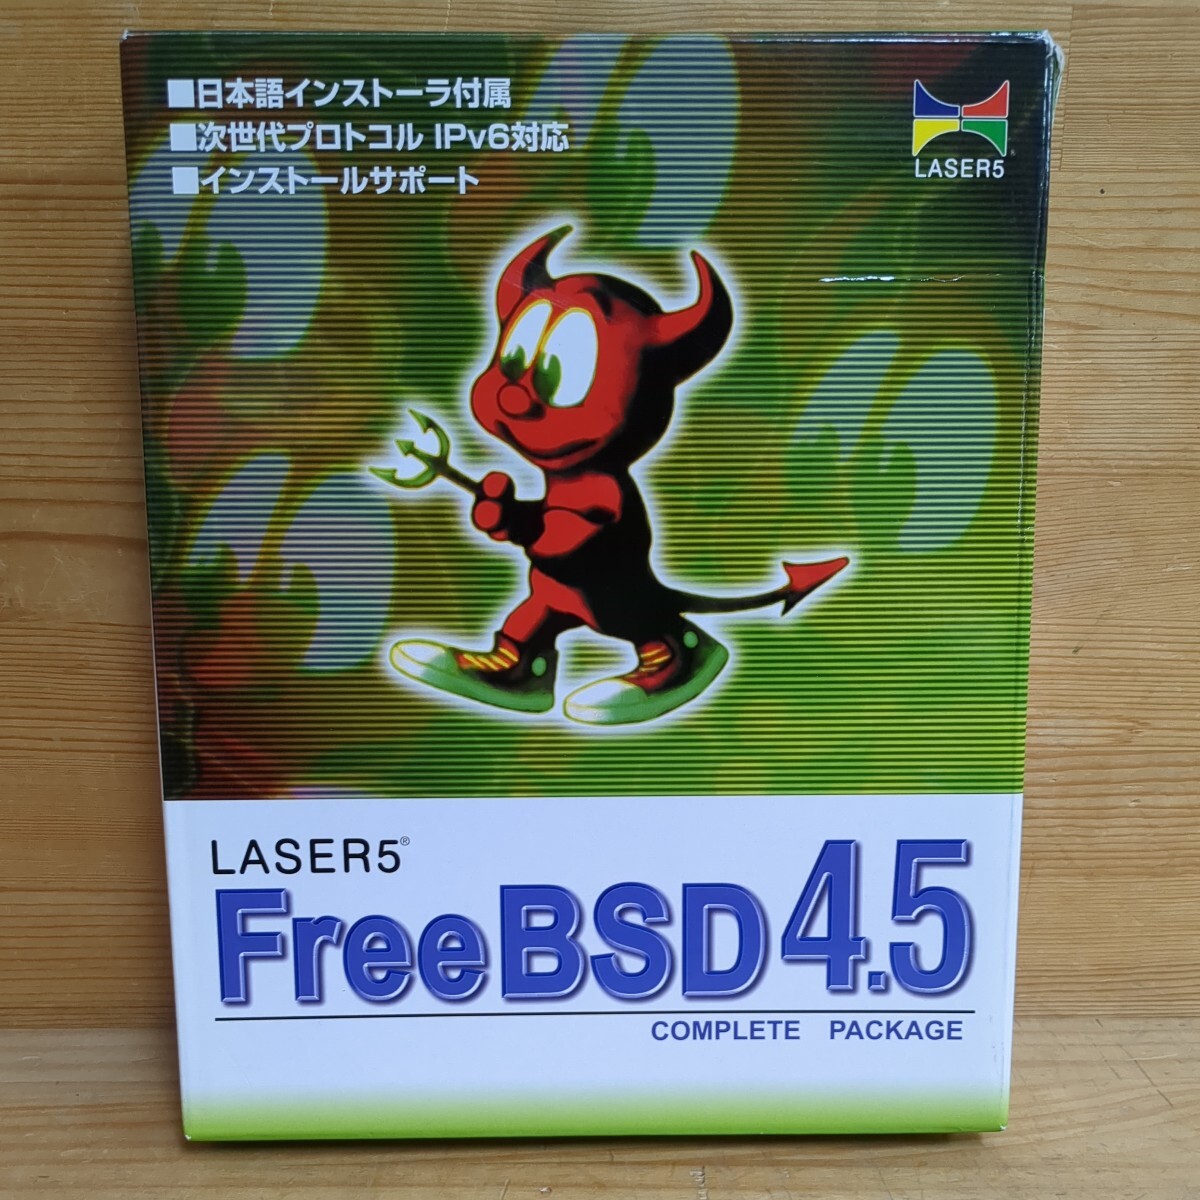 g35*LASER5 FreeBSD 4.5COMPLETE PACKAGE Japanese installer attached next generation protocol IPv6 correspondence PC-9801.PC-9821 optimum 240607